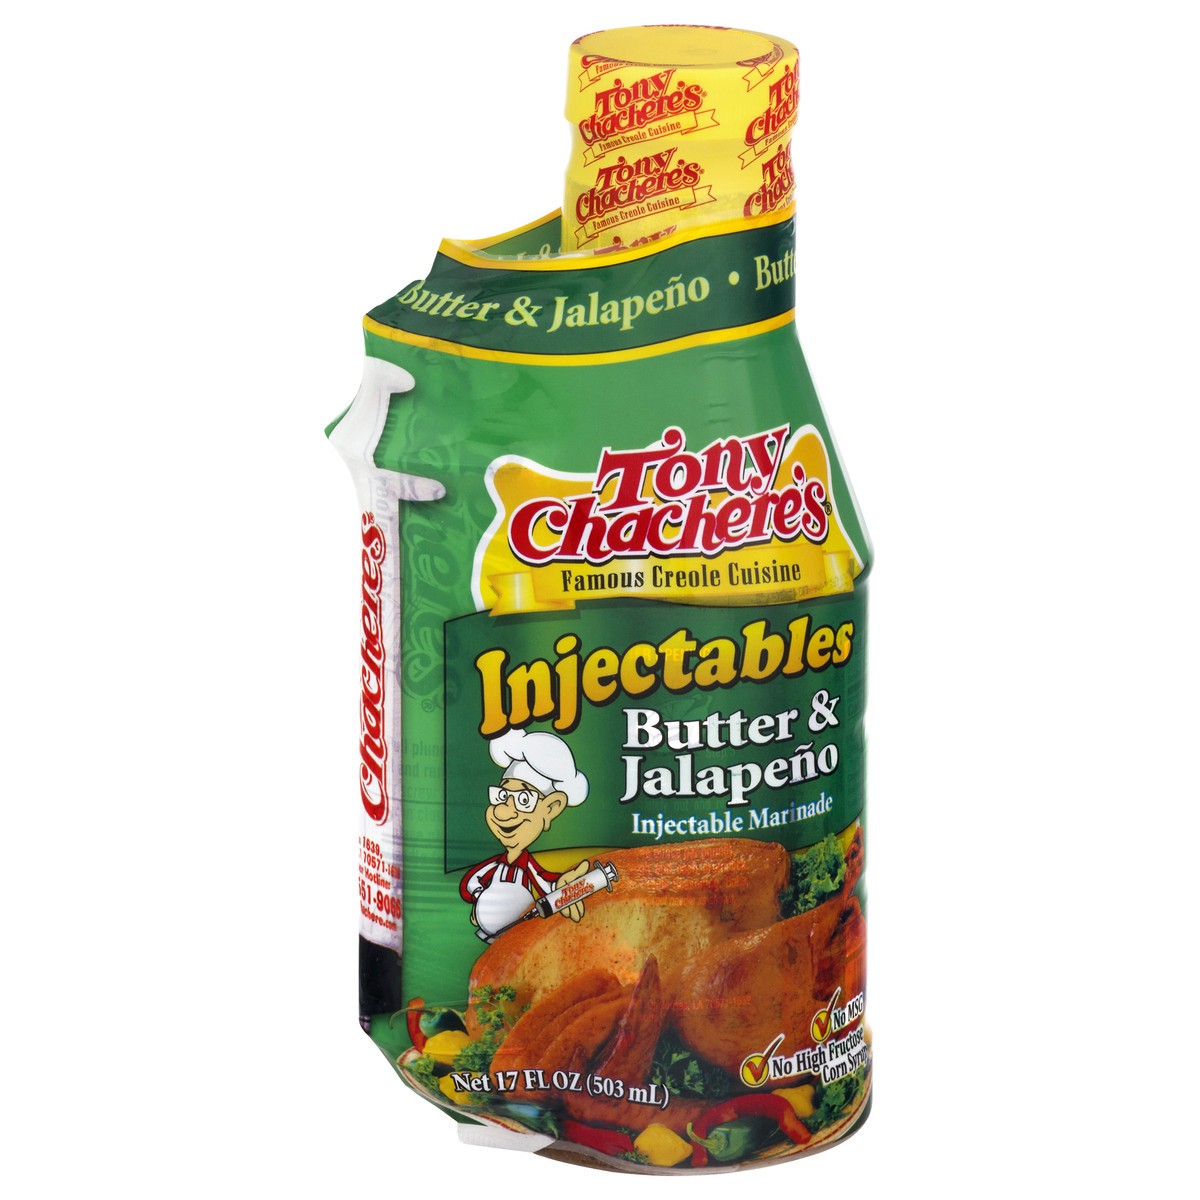 Tony Chachere's Creole Injectable Marinade (2) BUTTER & JALAPENO